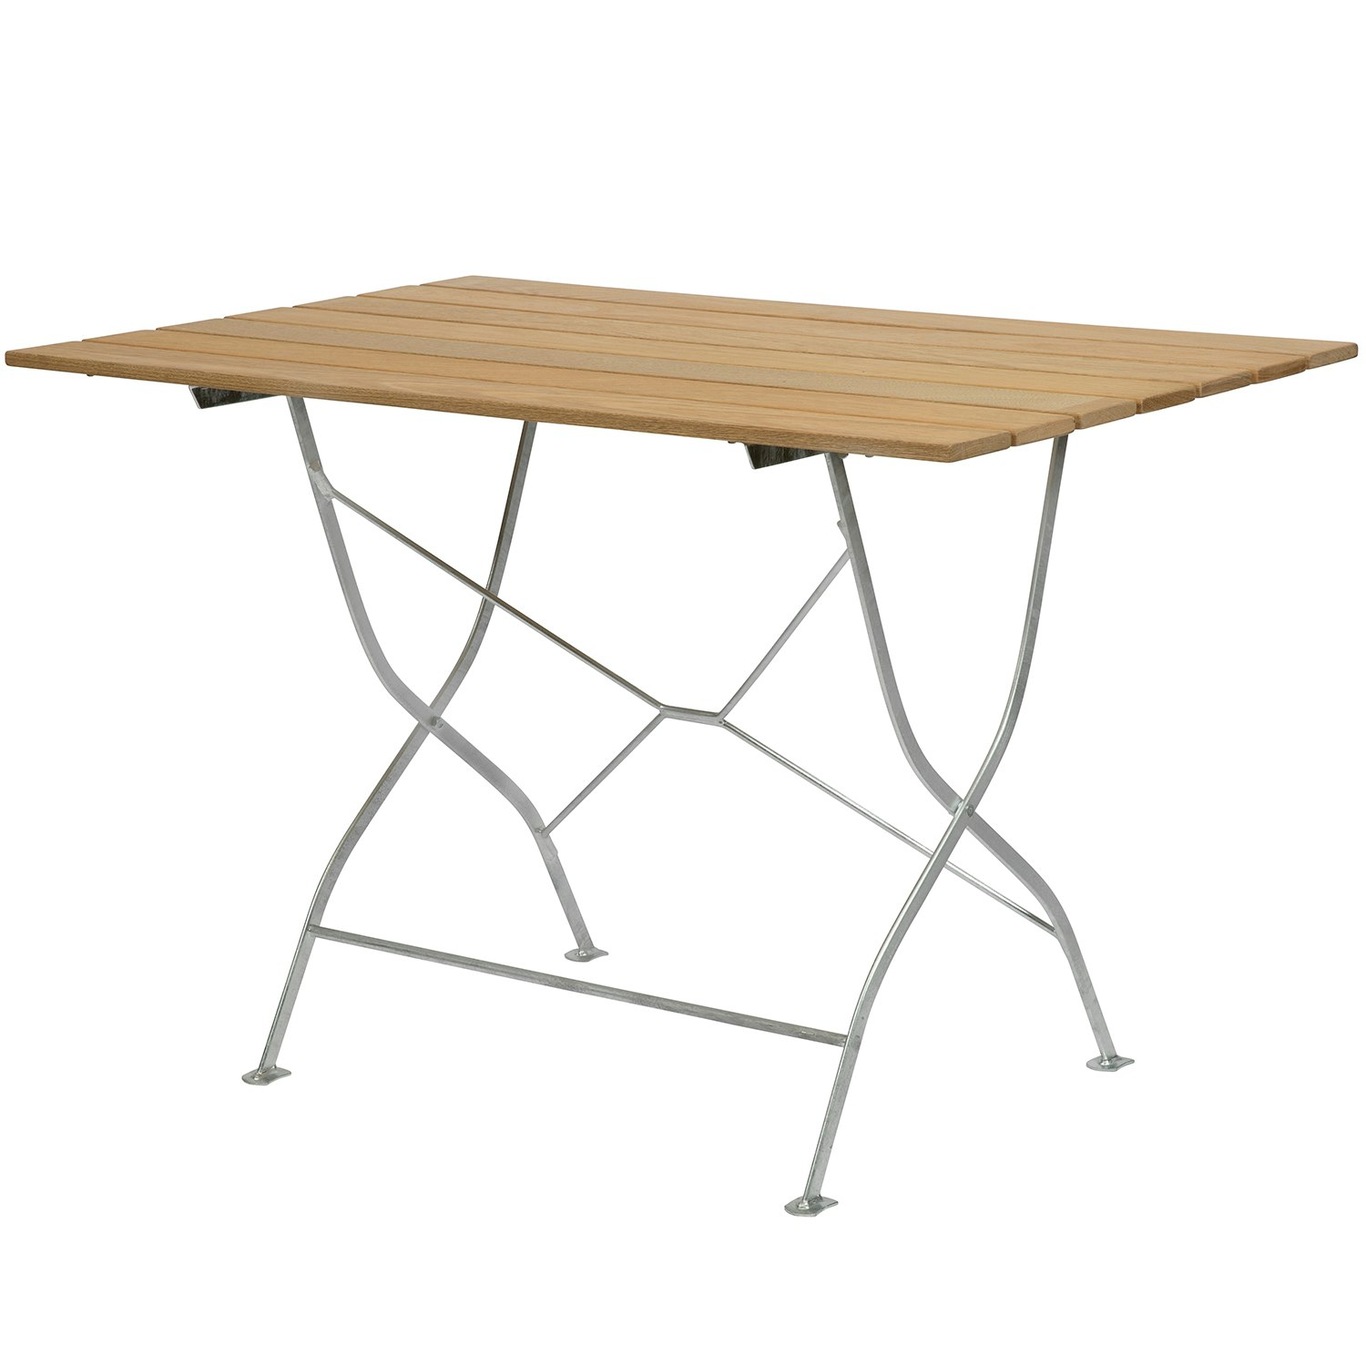 Brewery Table 70x110 cm, Oiled Oak / Hot Galvanized Steel